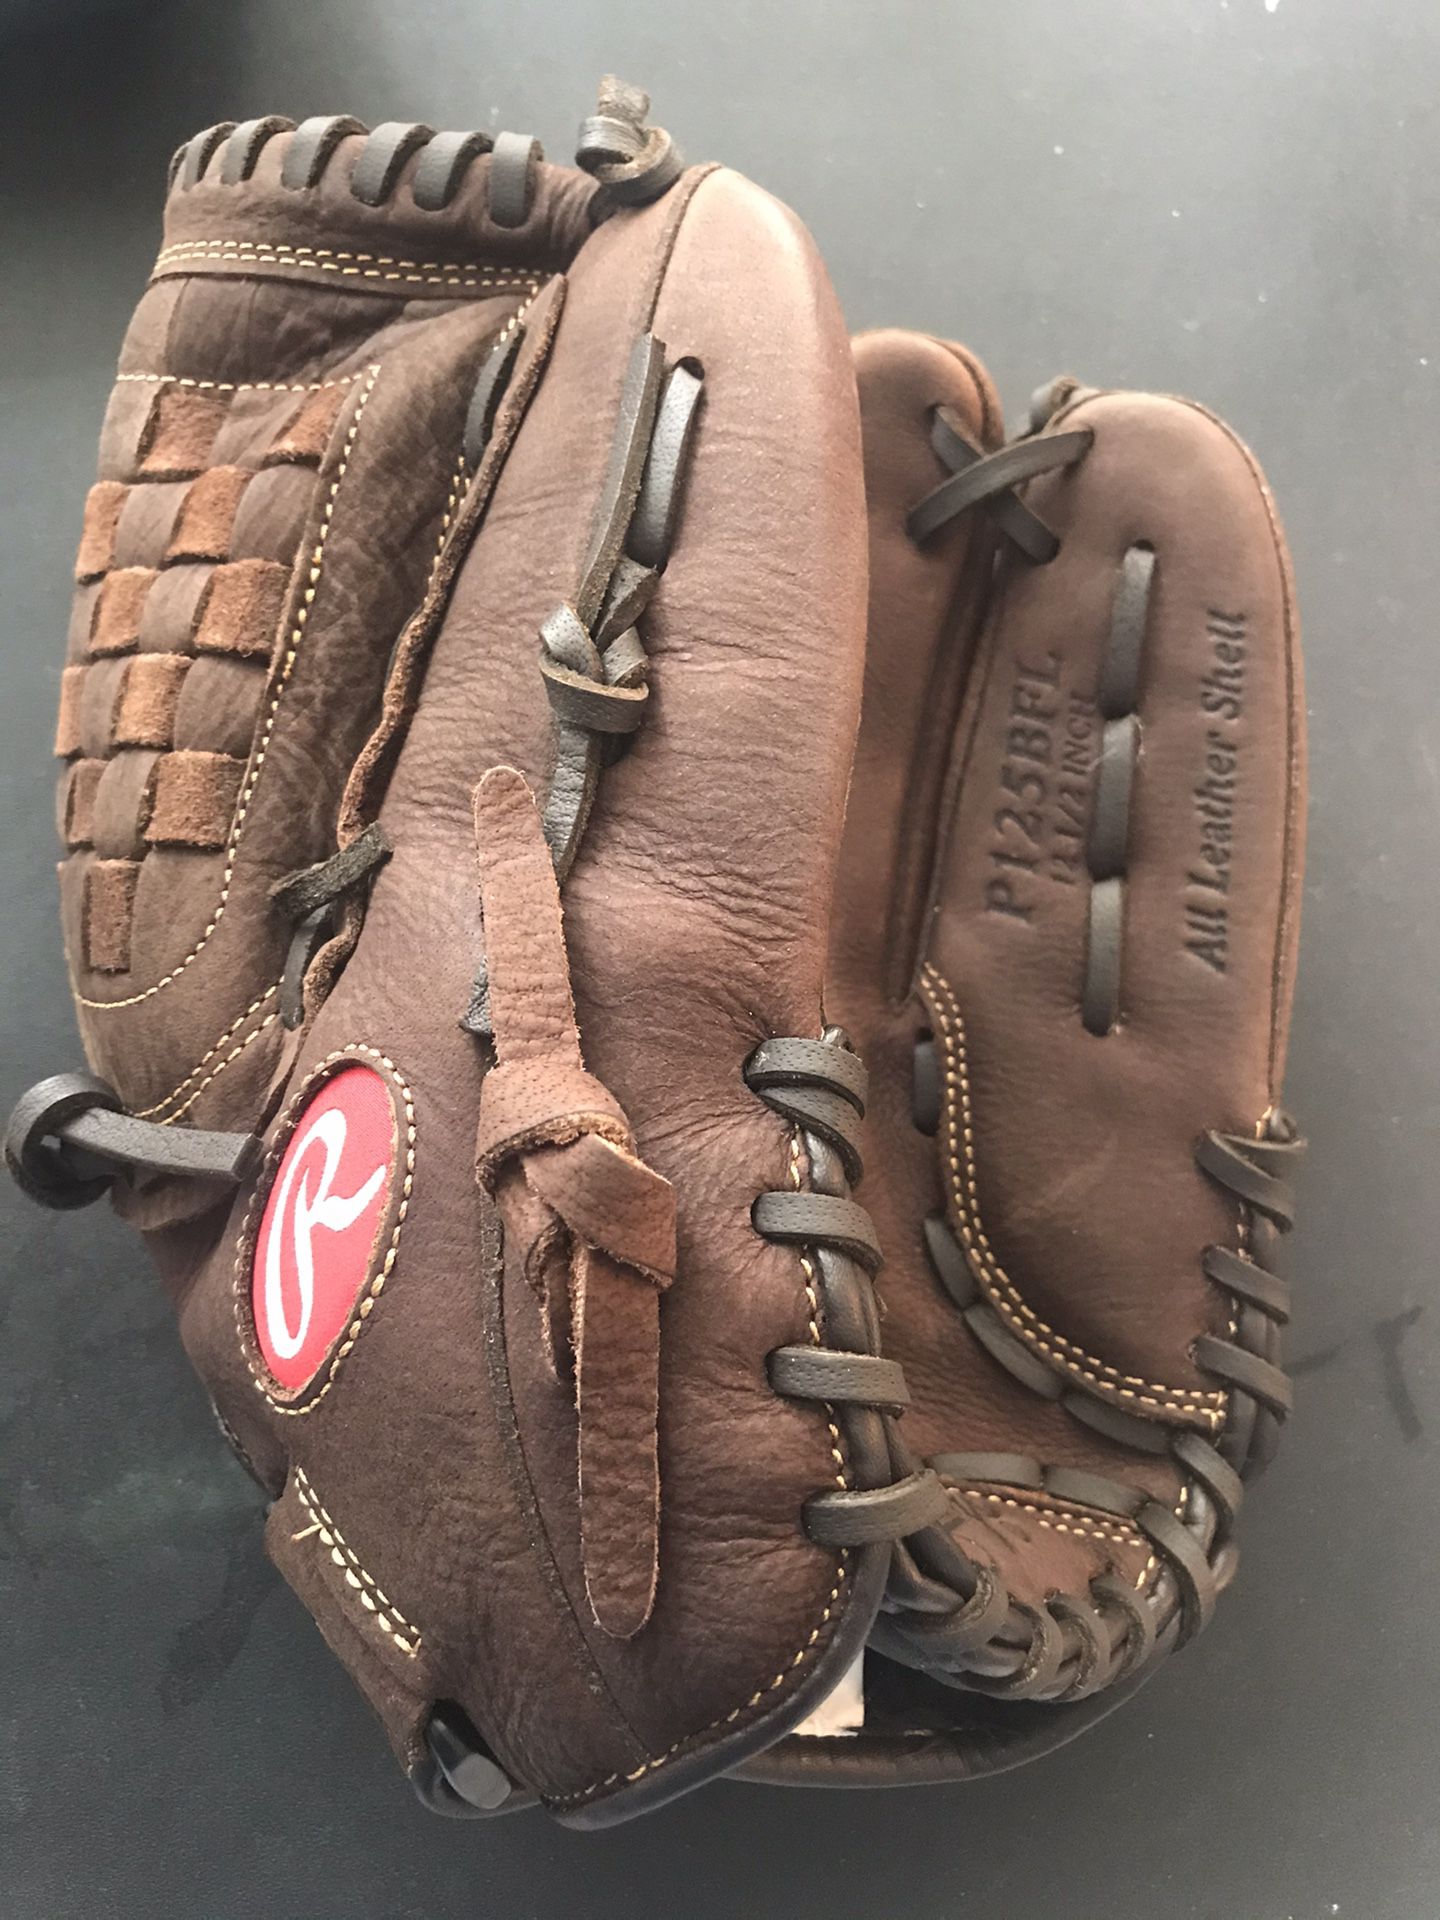 Rawlings Glove All Leather Shell 12 1/2 Inch